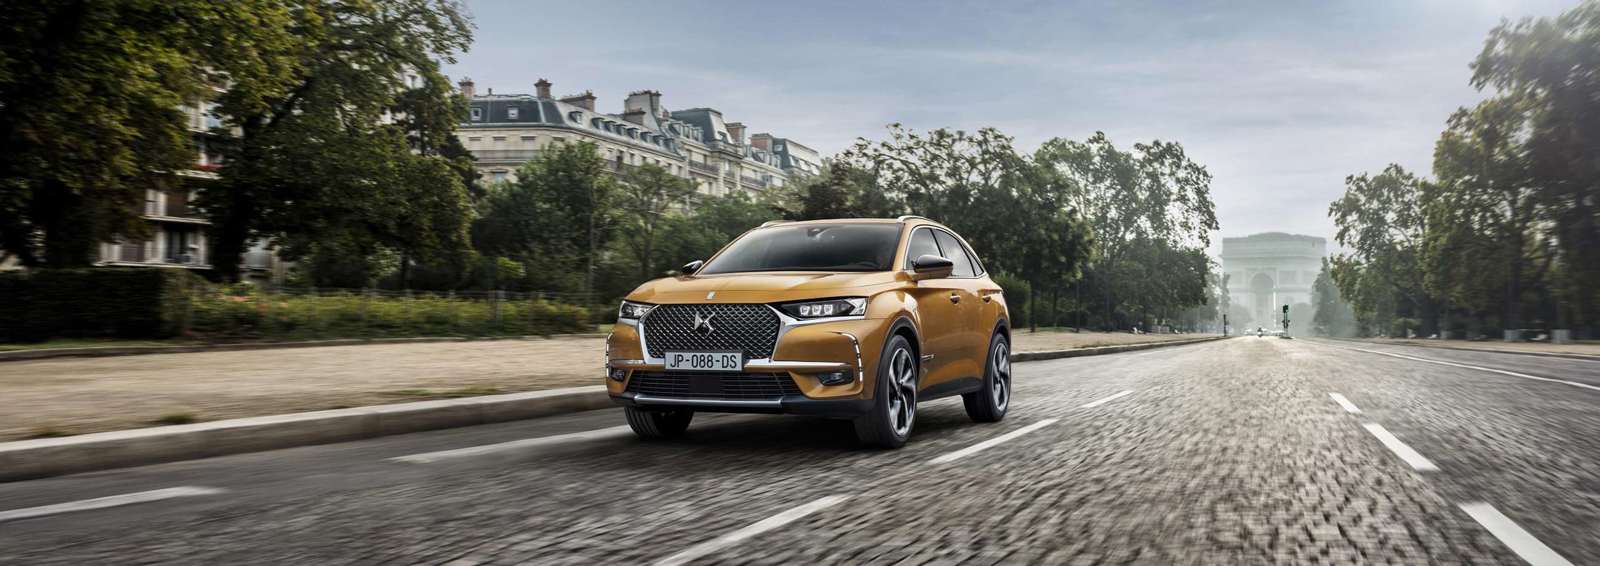 First Drive Ds 7 Crossback